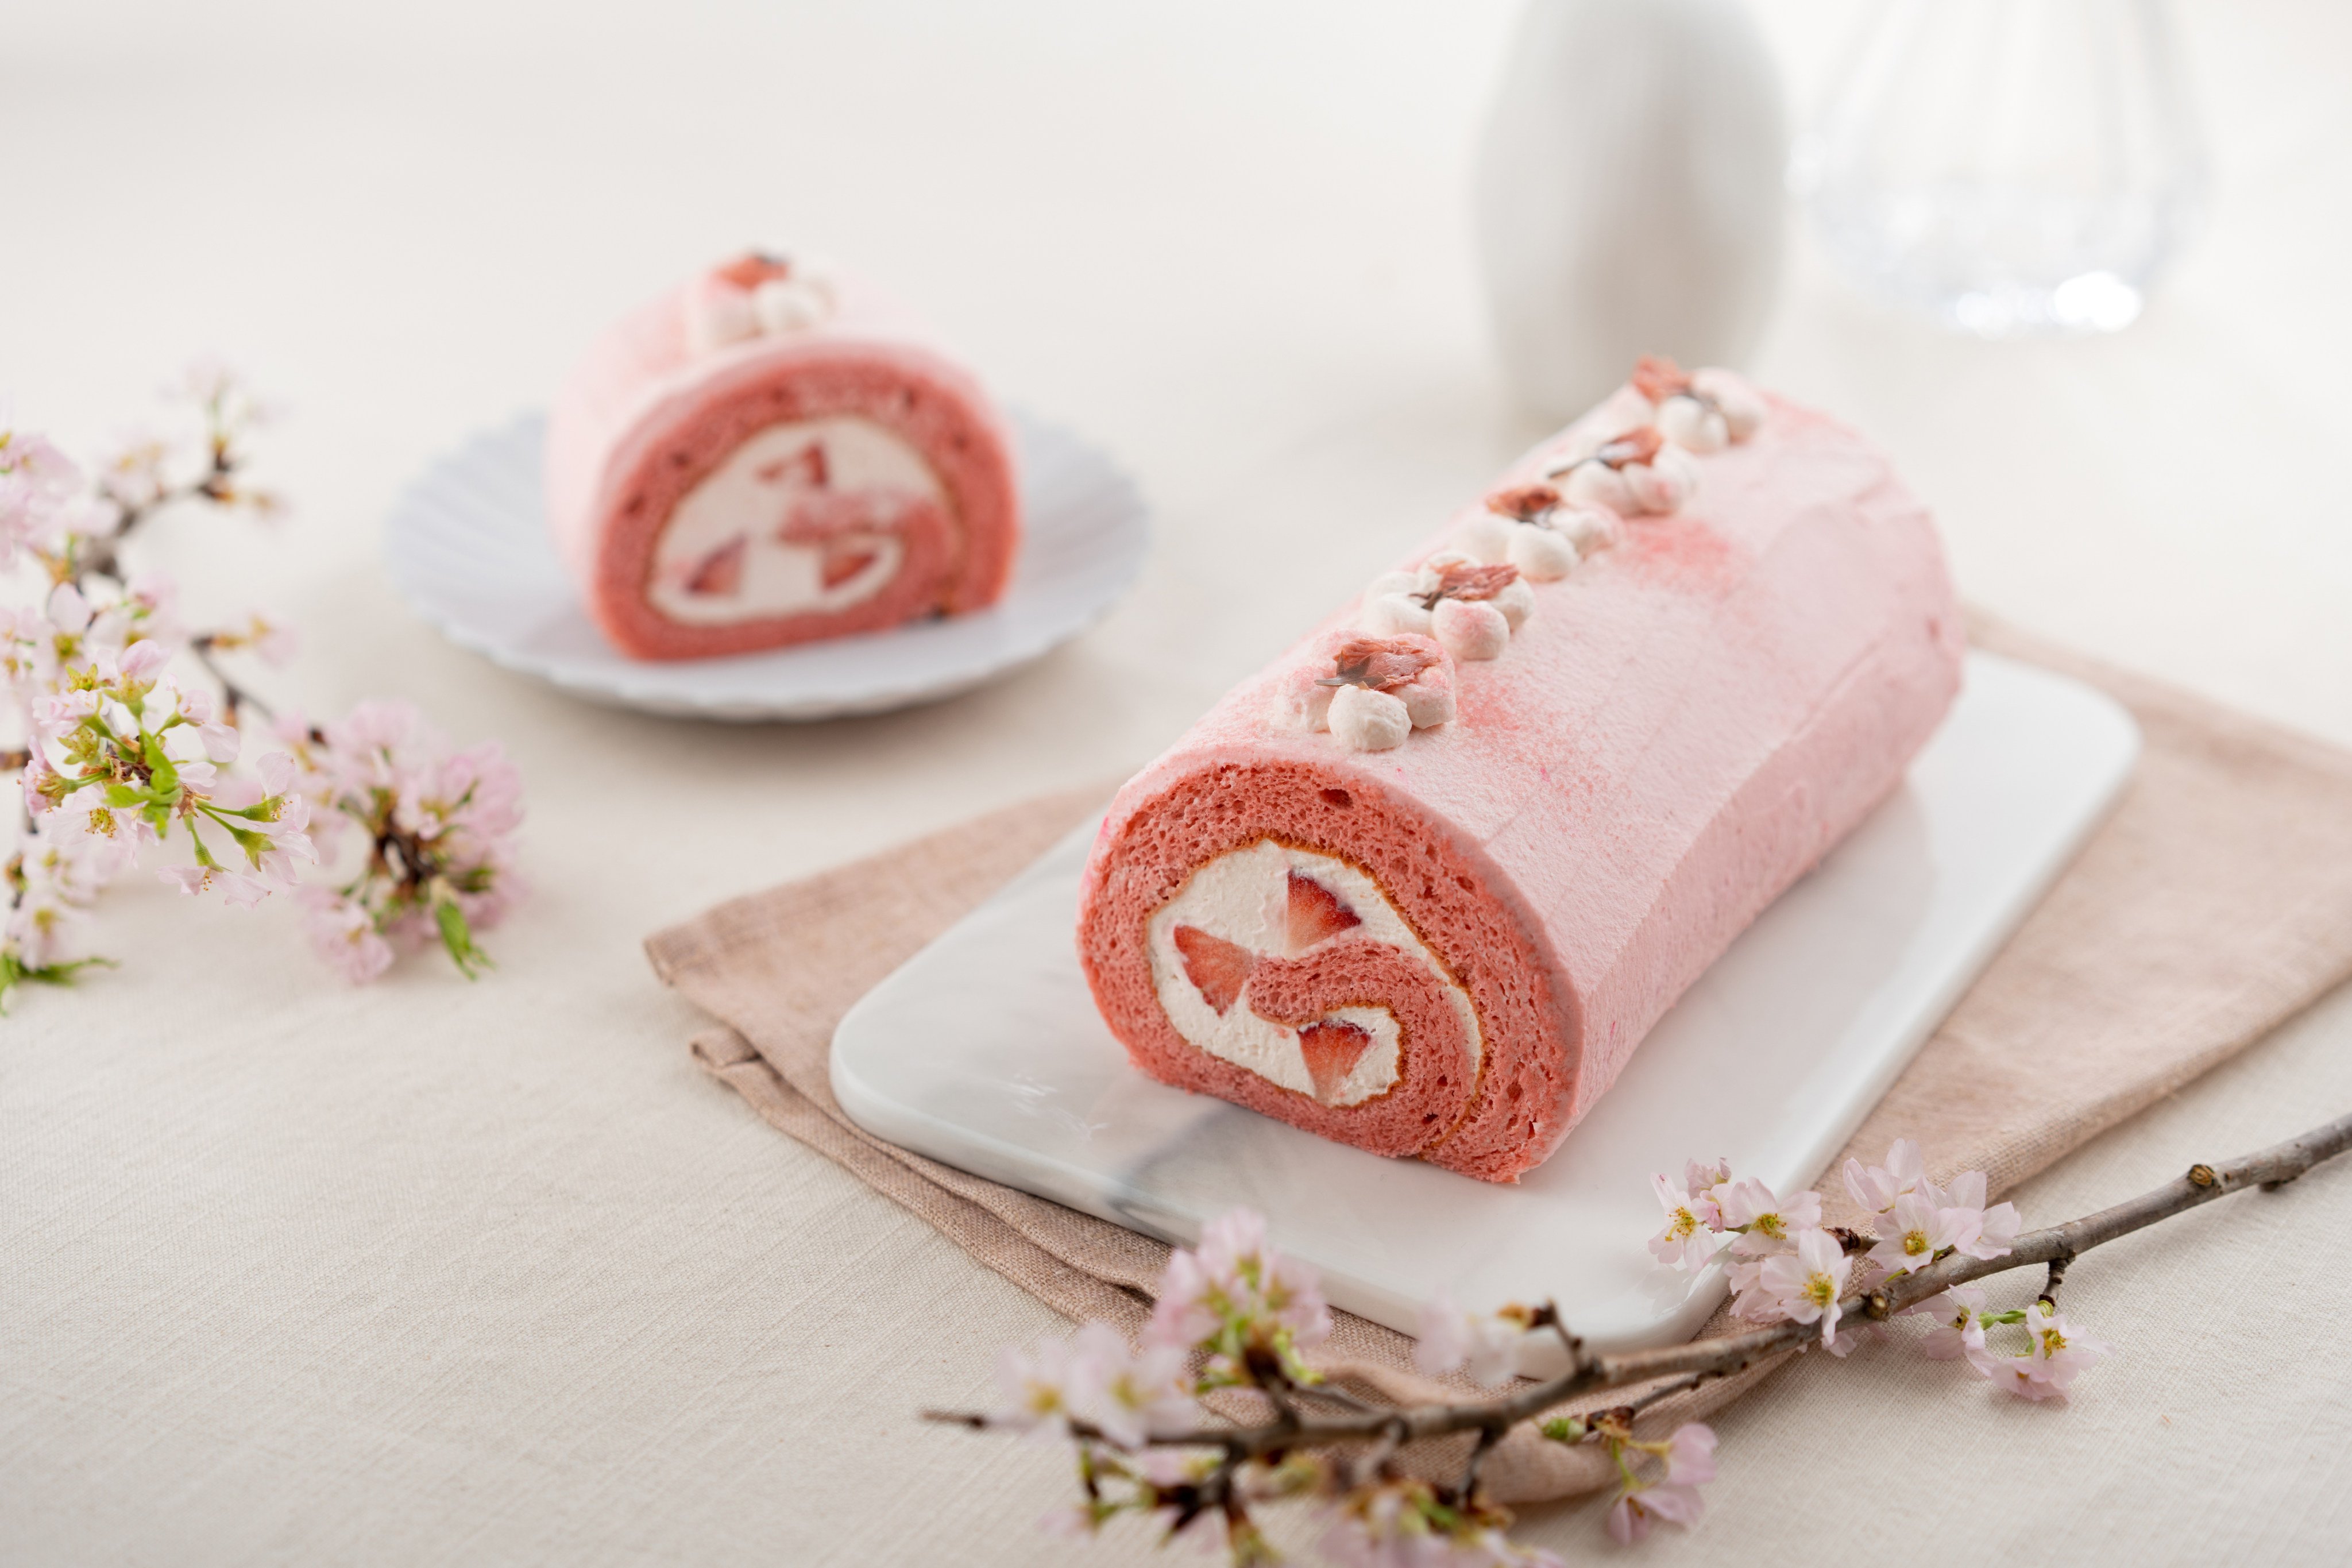 Sakura roll cake at Hong Kong patisserie Kiyoka, which infuses the Japanese cherry blossom throughout the cake dough, cream filling and with garnishes. Photo: Kiyoka